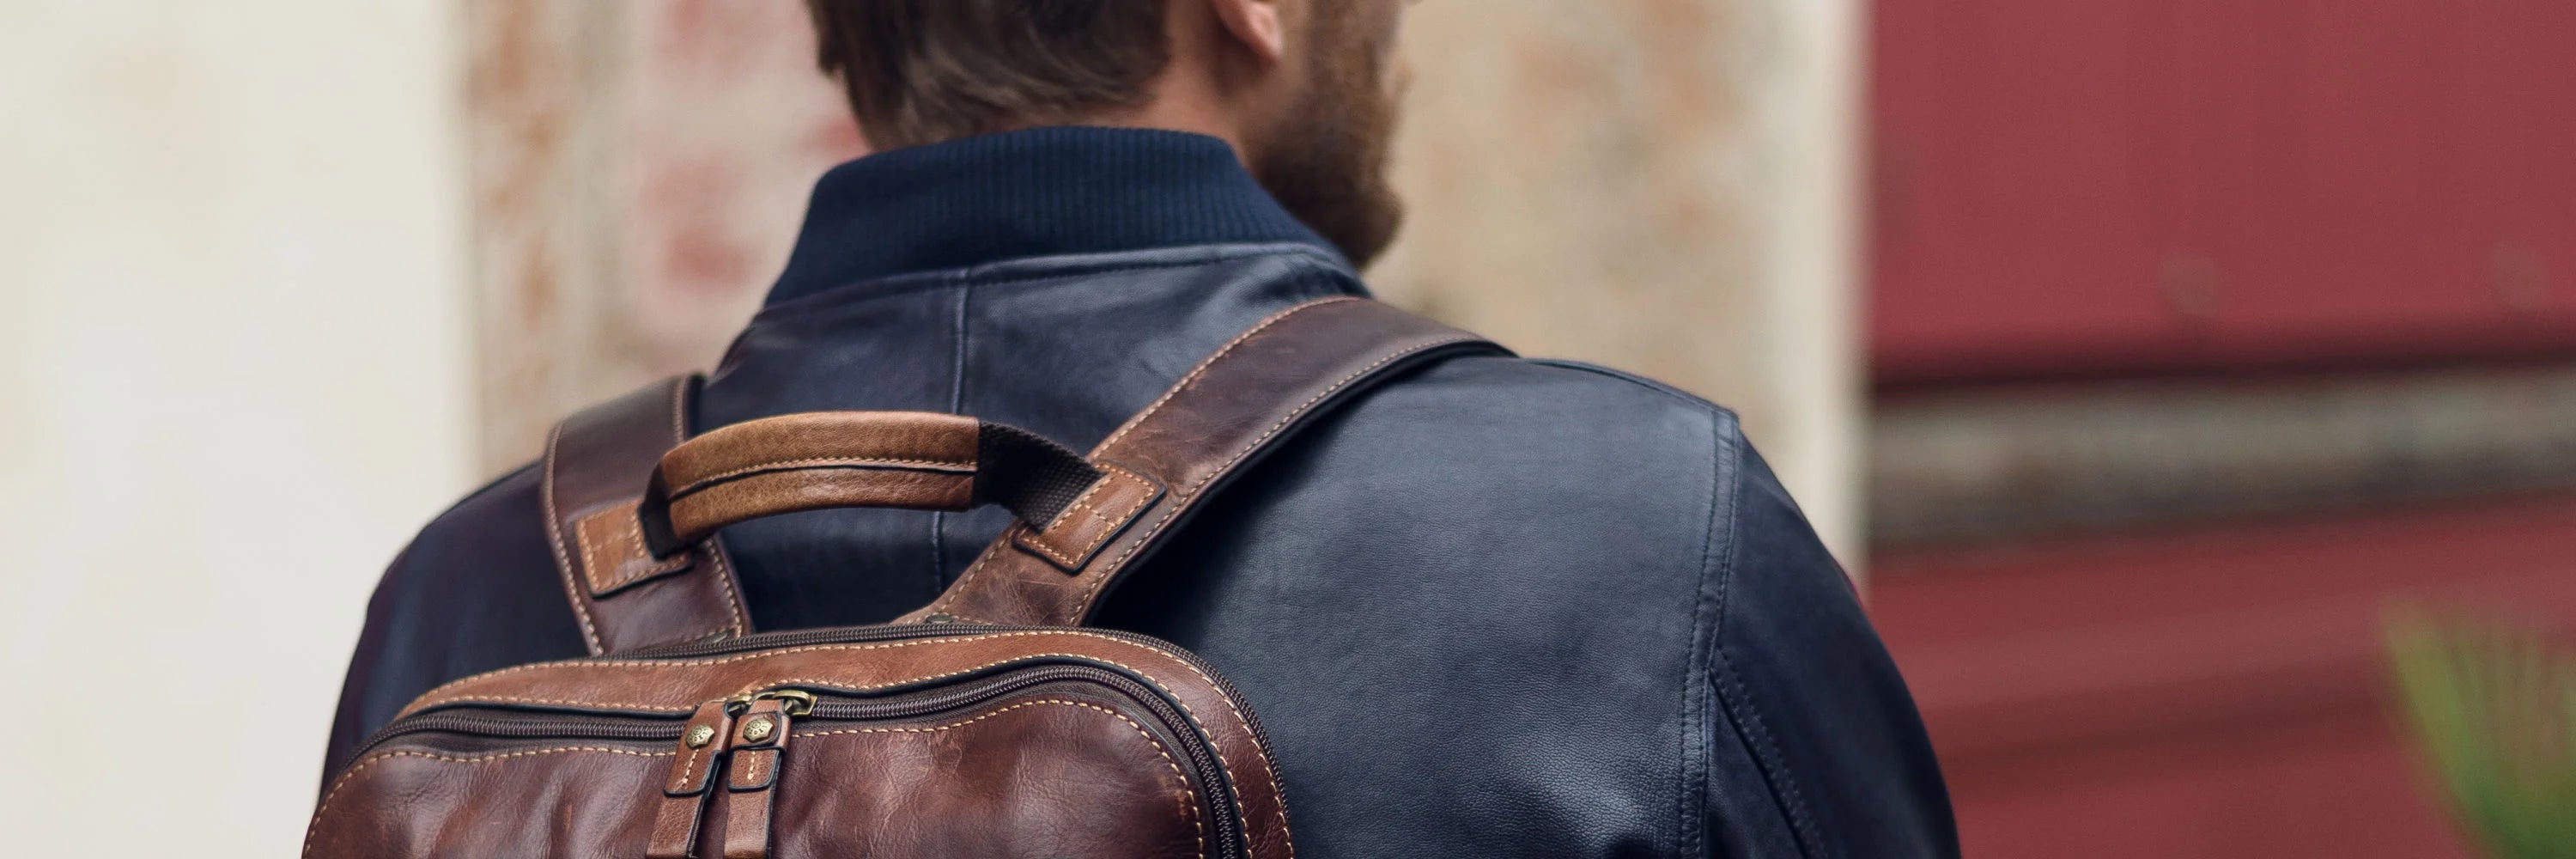 What Leather Travel Accessories Should You Never Leave Home Without?